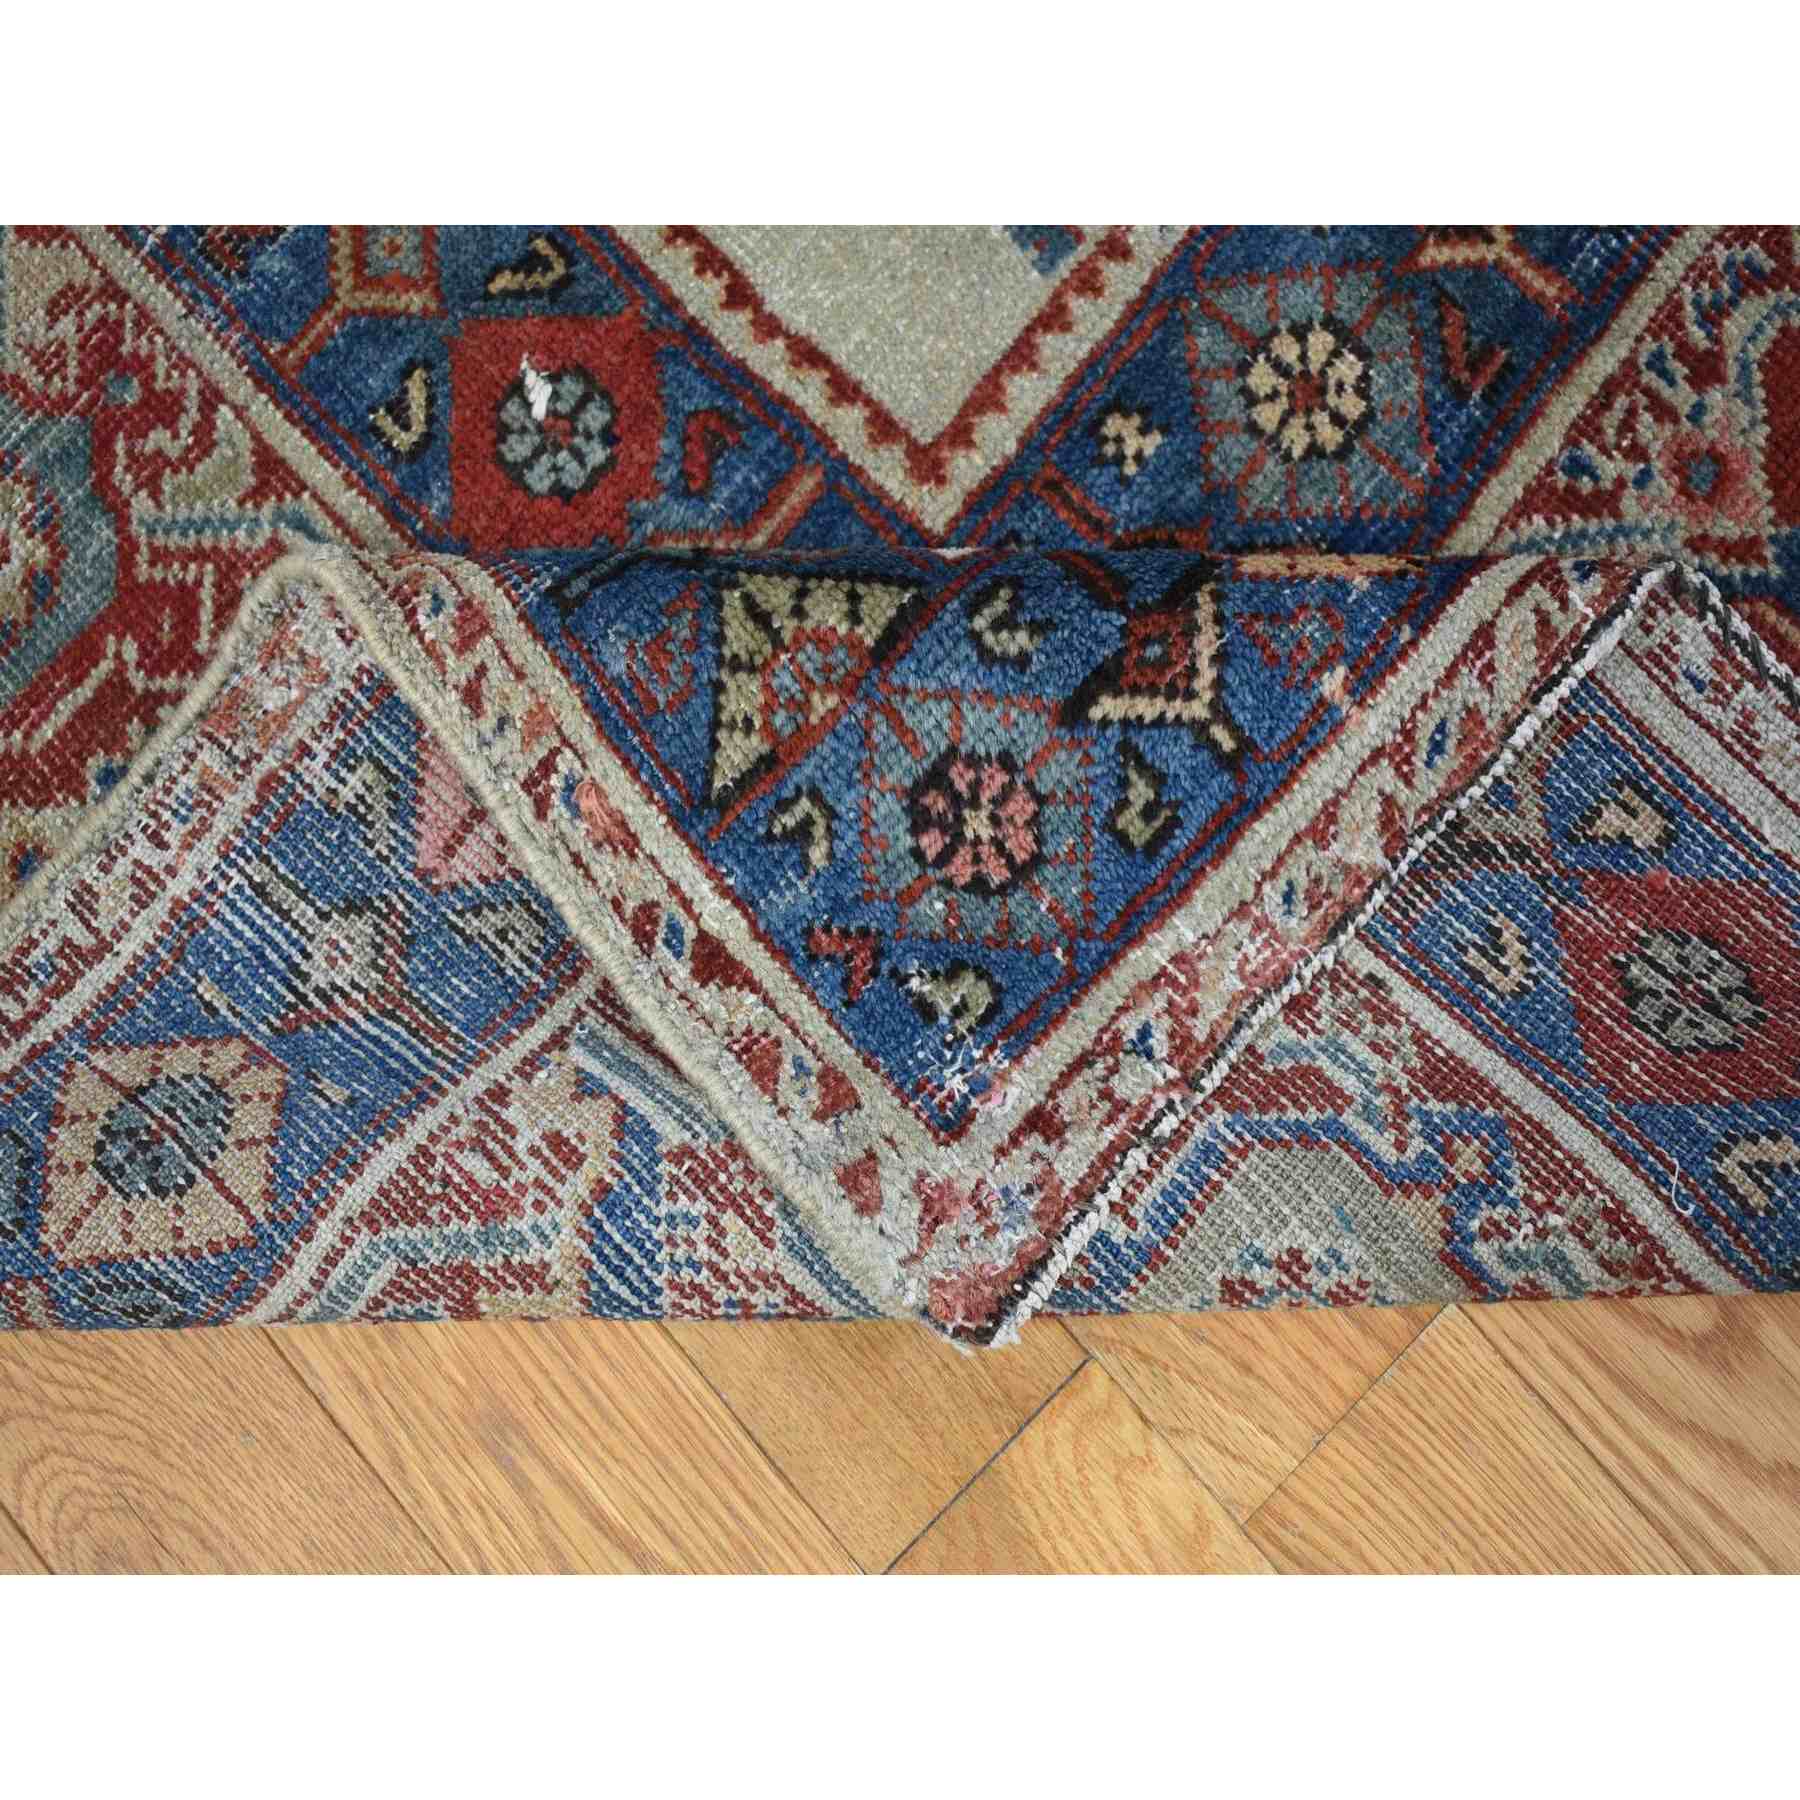 Antique-Hand-Knotted-Rug-400580